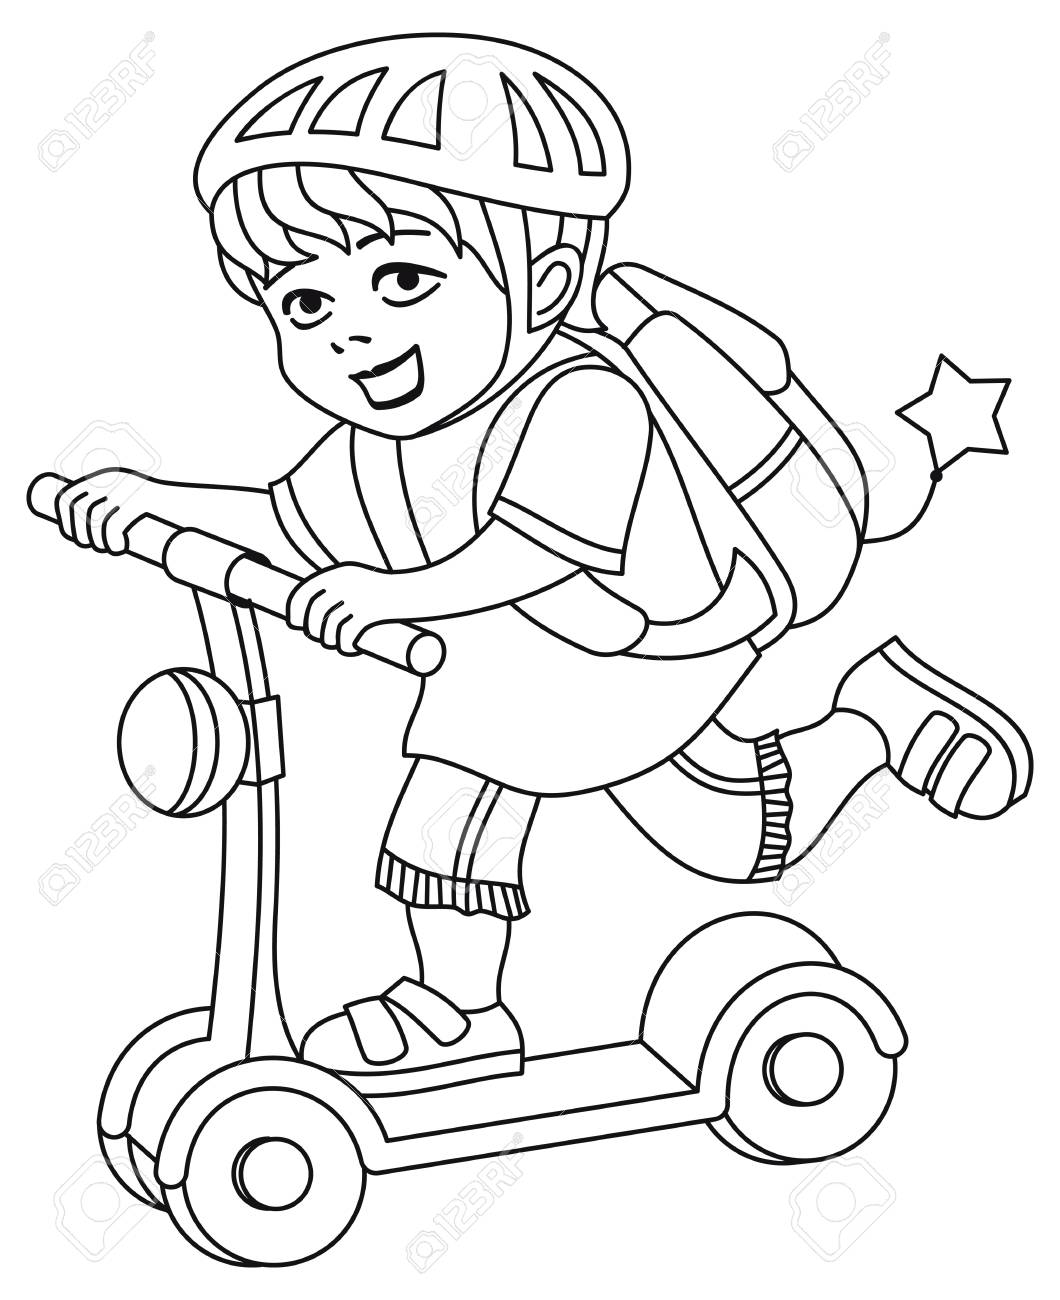 A kid in a bike helmet and with a backpack on his back rides a scooter printable coloring page for kids royalty free svg cliparts vectors and stock illustration image